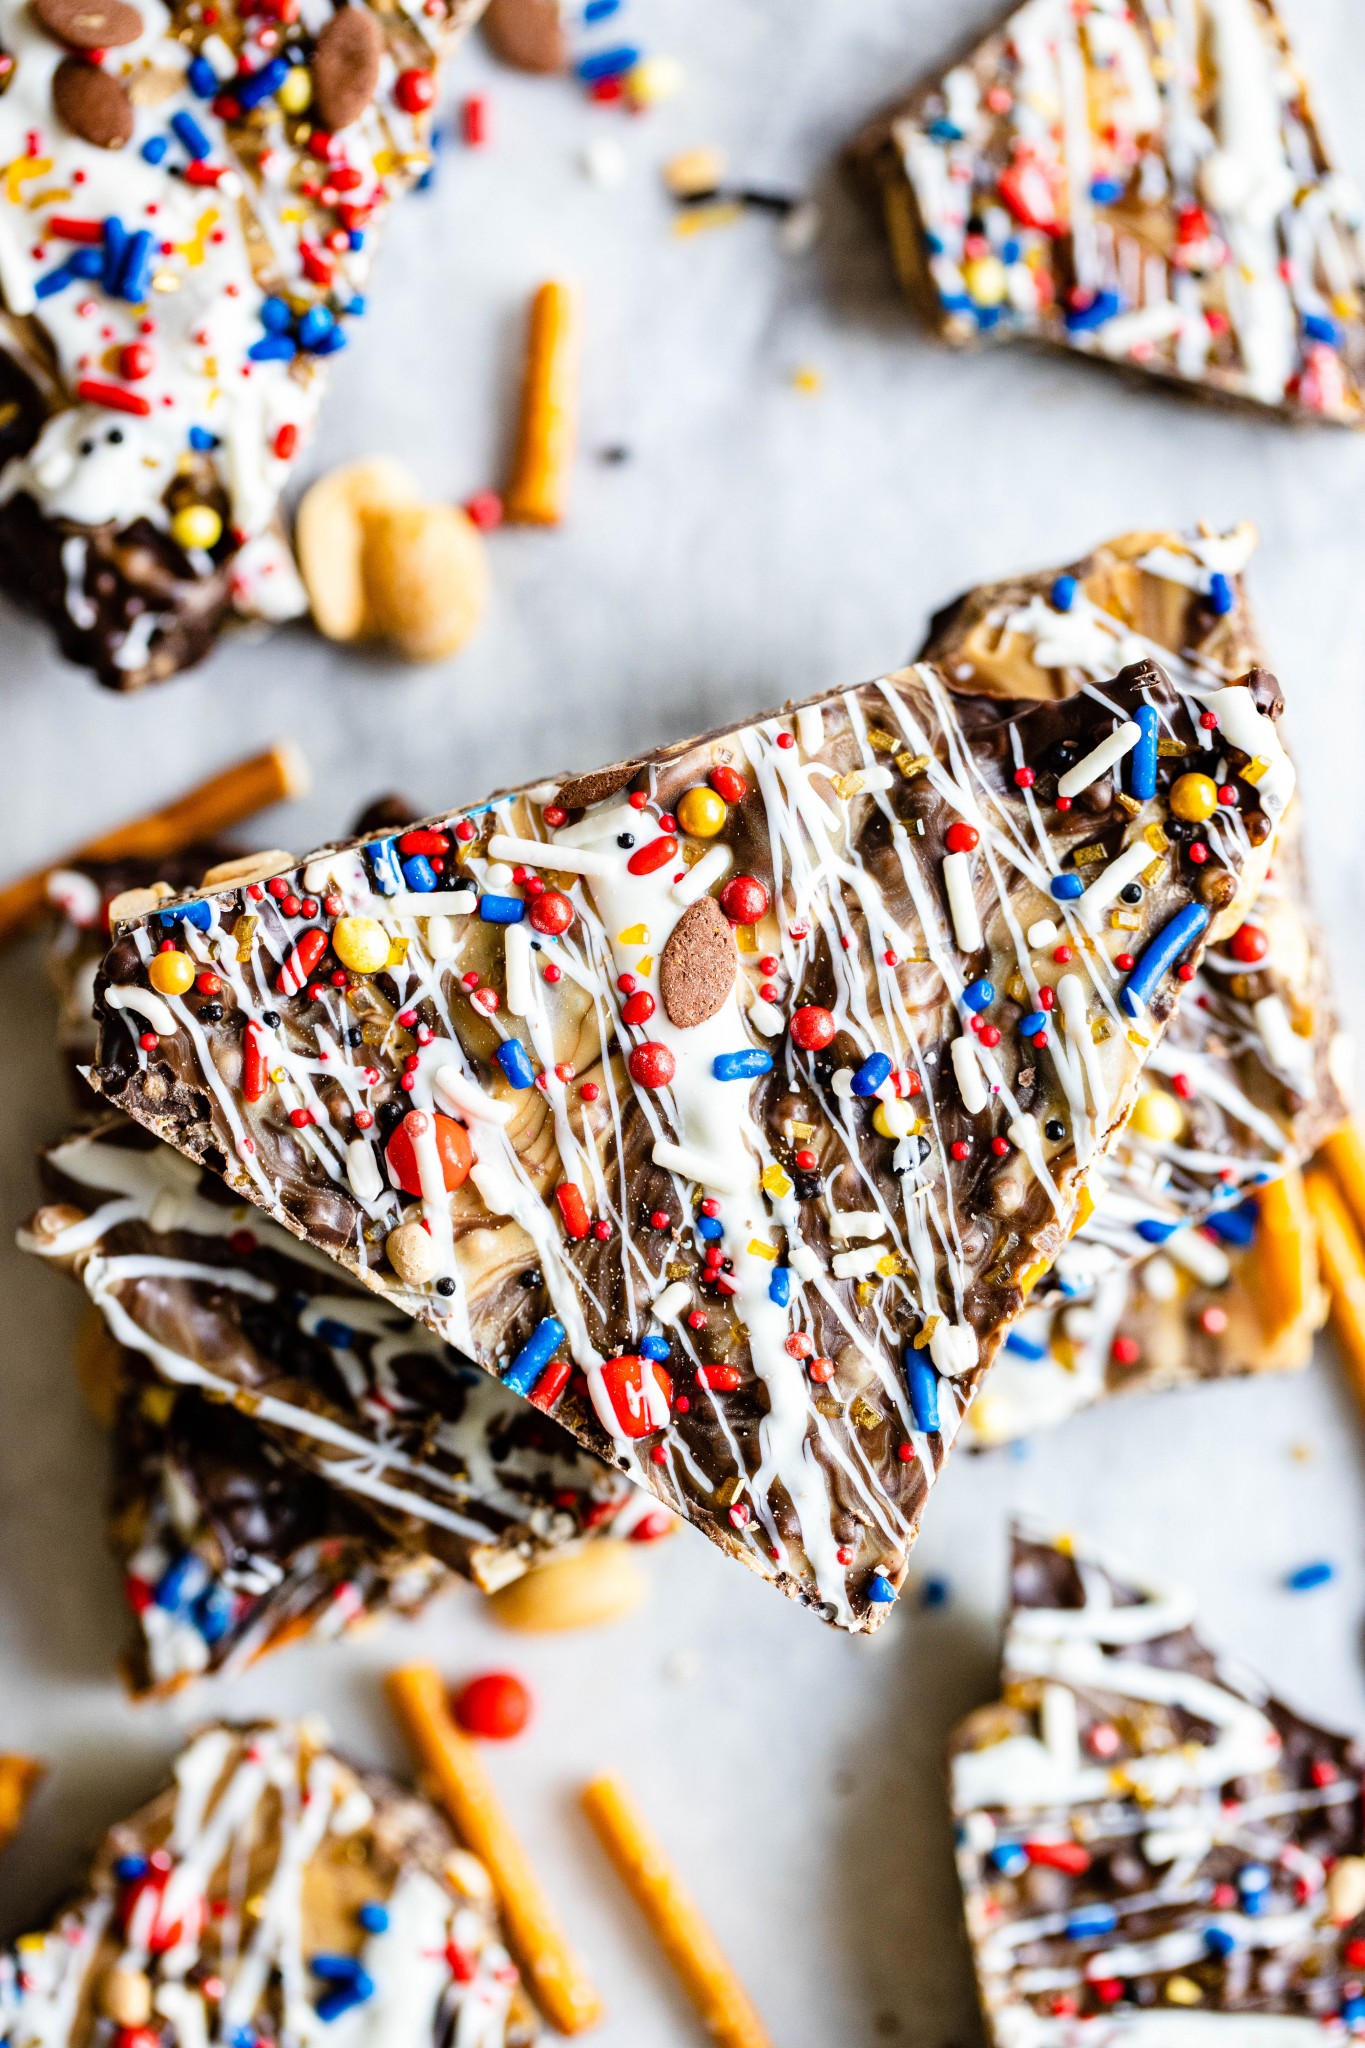 white chocolate drizzled on top of peanut butter and chocolate bark